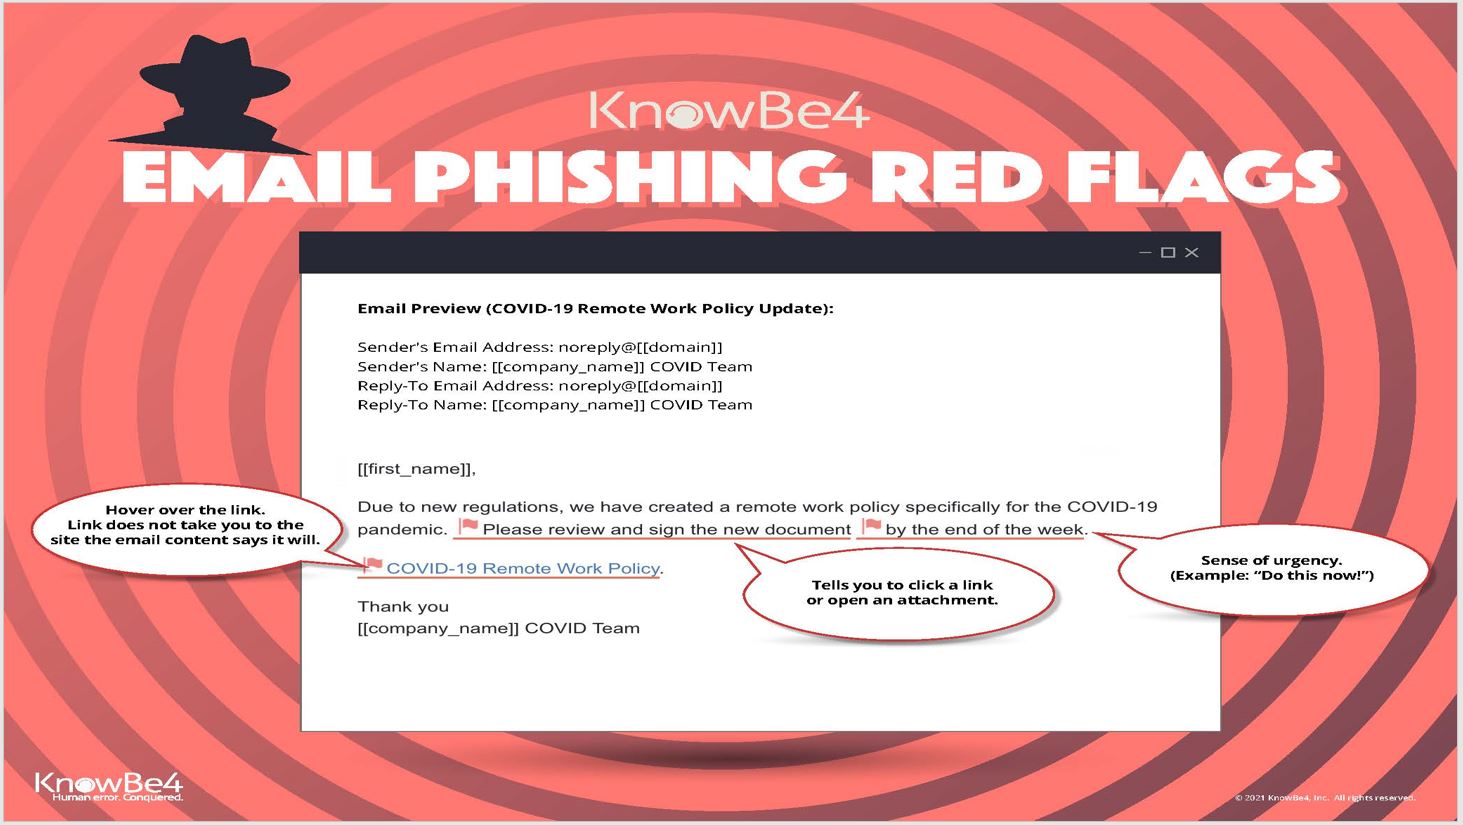  Email Phishing Red Flags